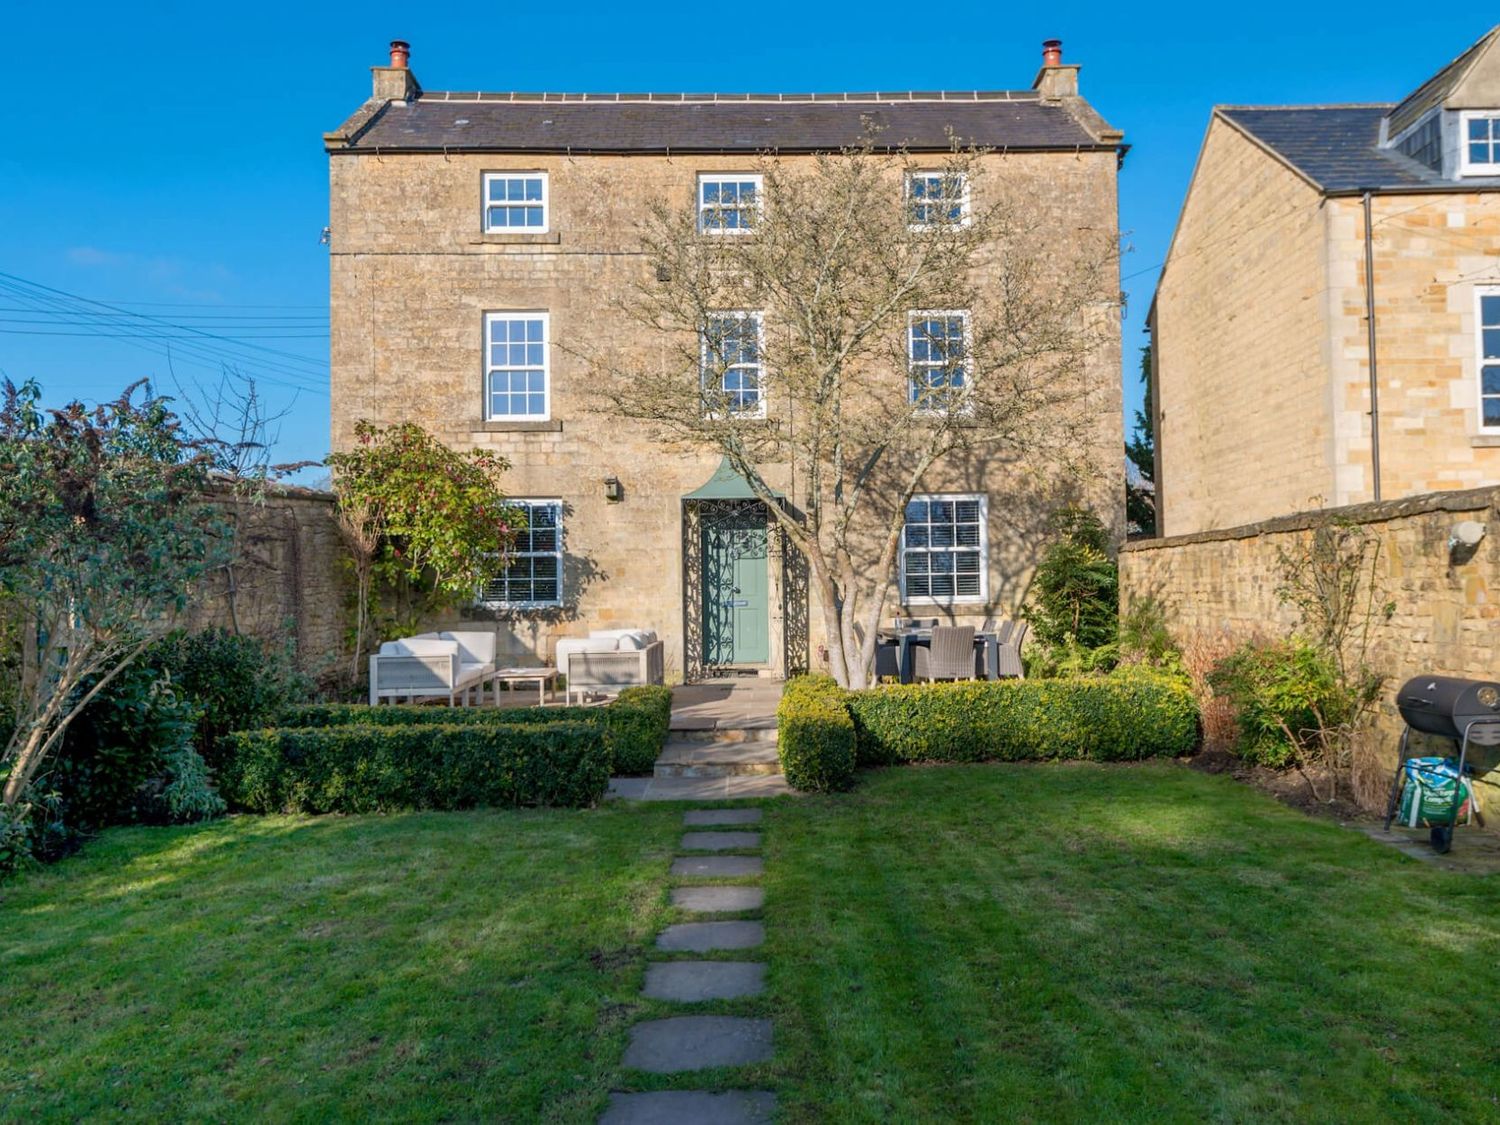 North End House - Cotswolds - 1091379 - photo 1